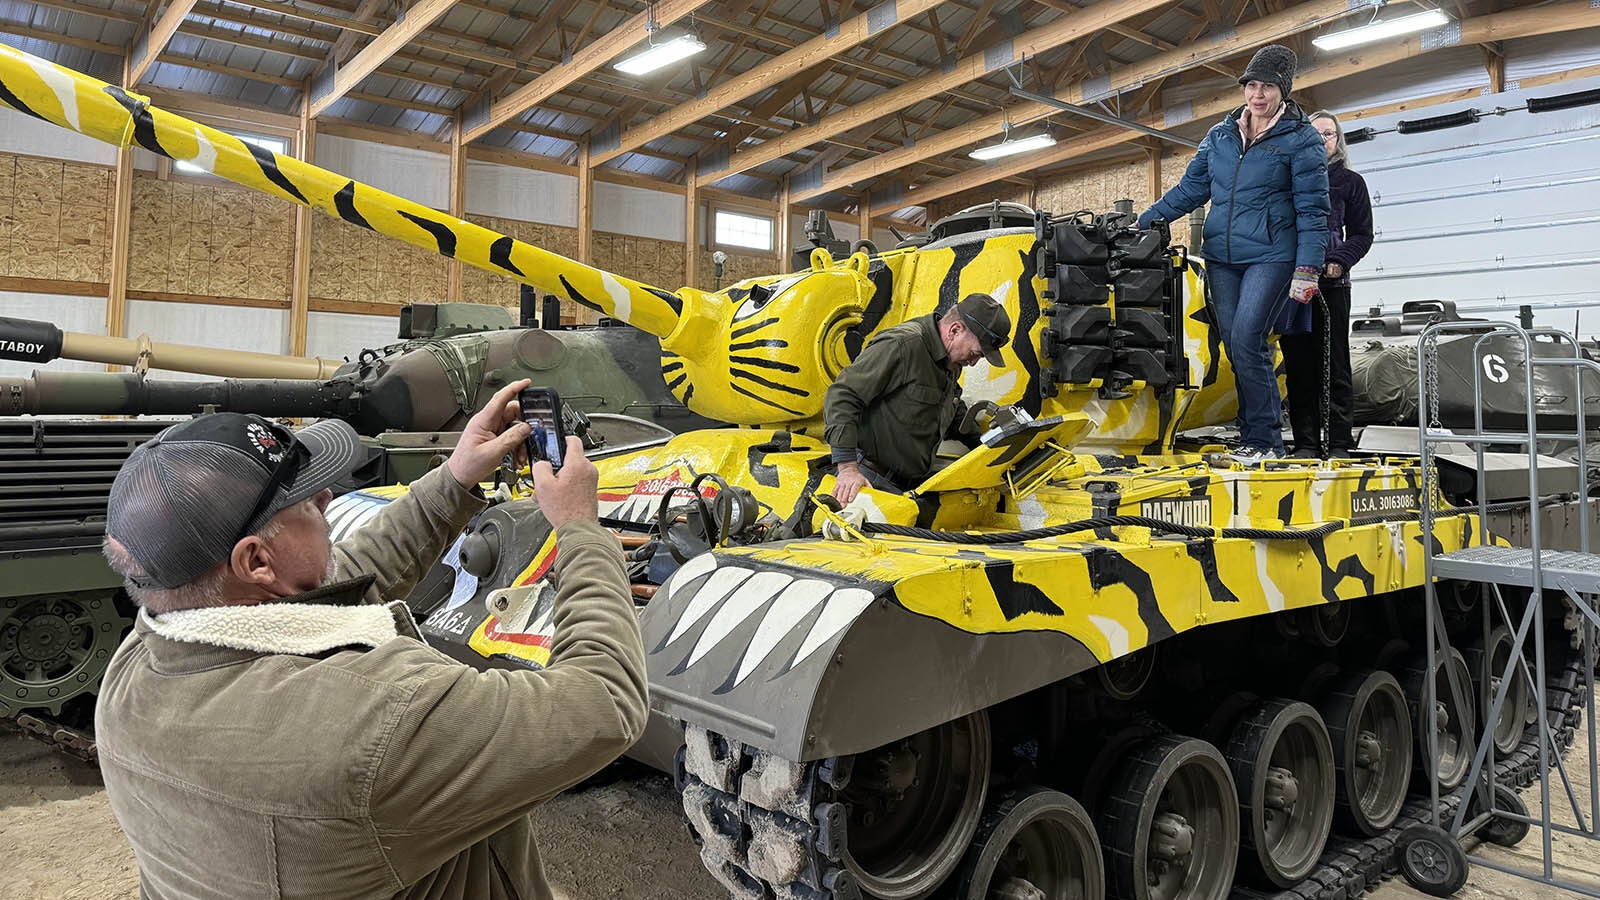 Visitors enjoy exploring a M46 Patton tank in the parade vehicle facility in the National Museum of Military Vehicles.